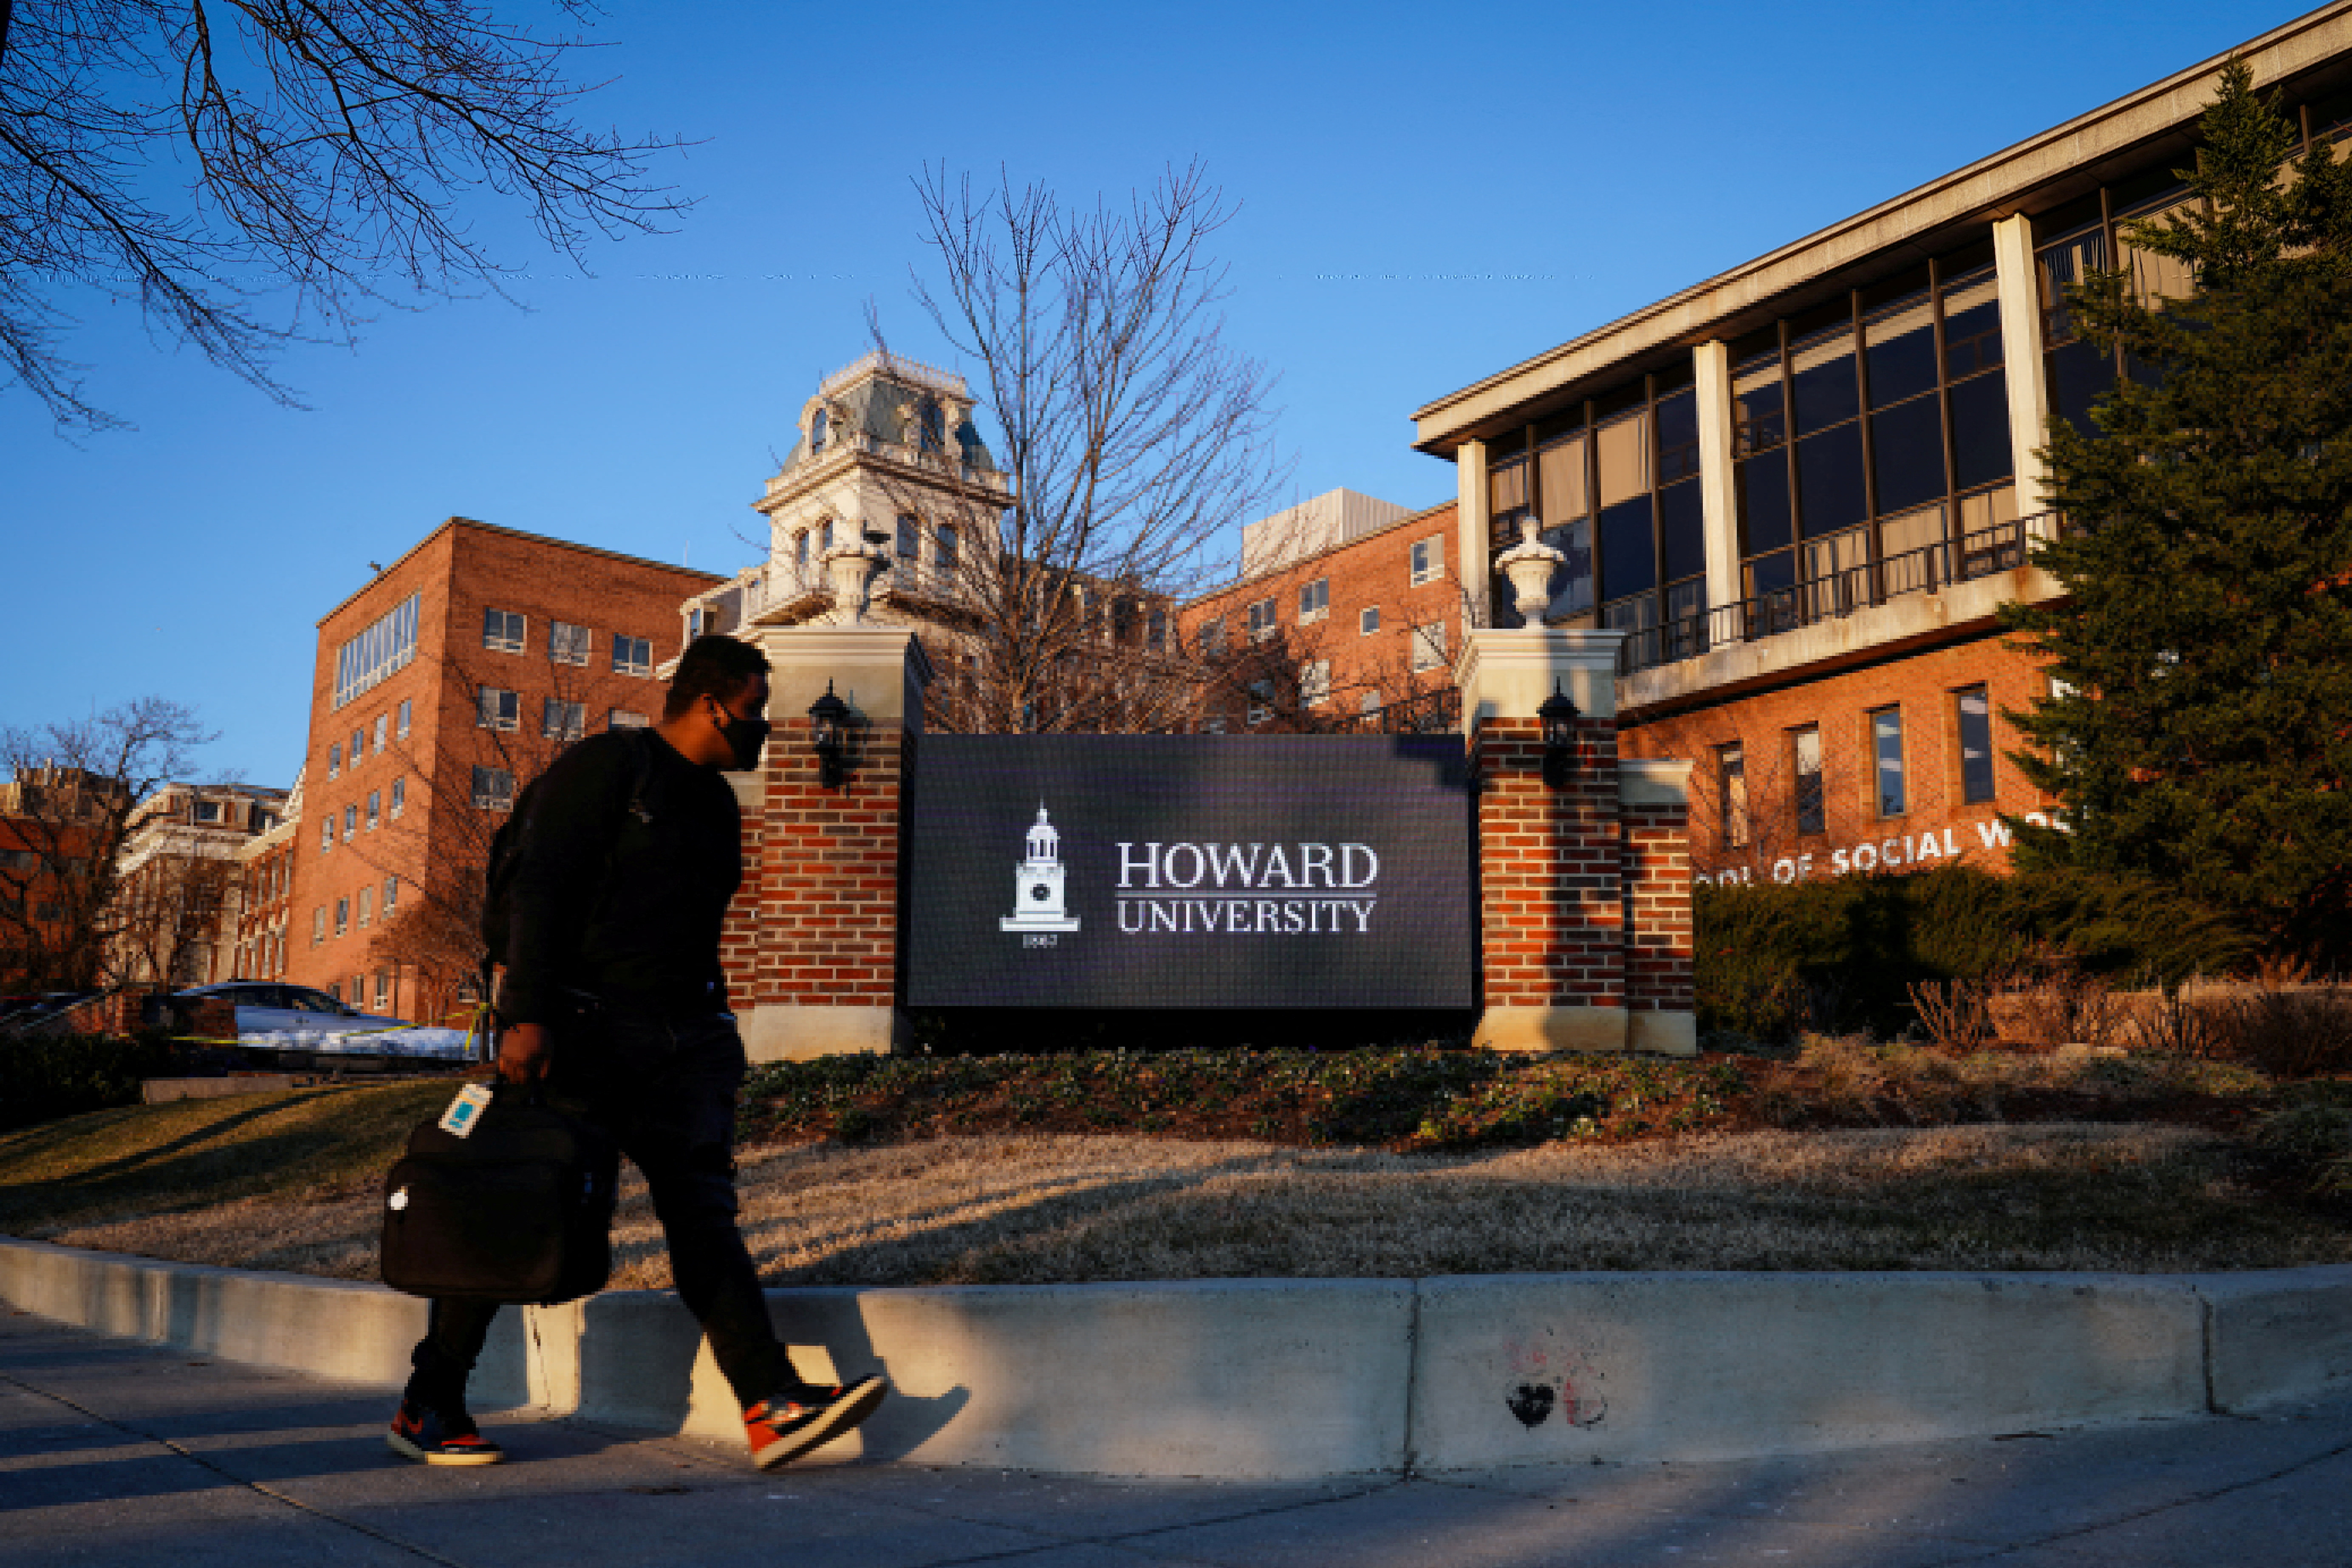 A student walks on the campus of Howard University in Washington